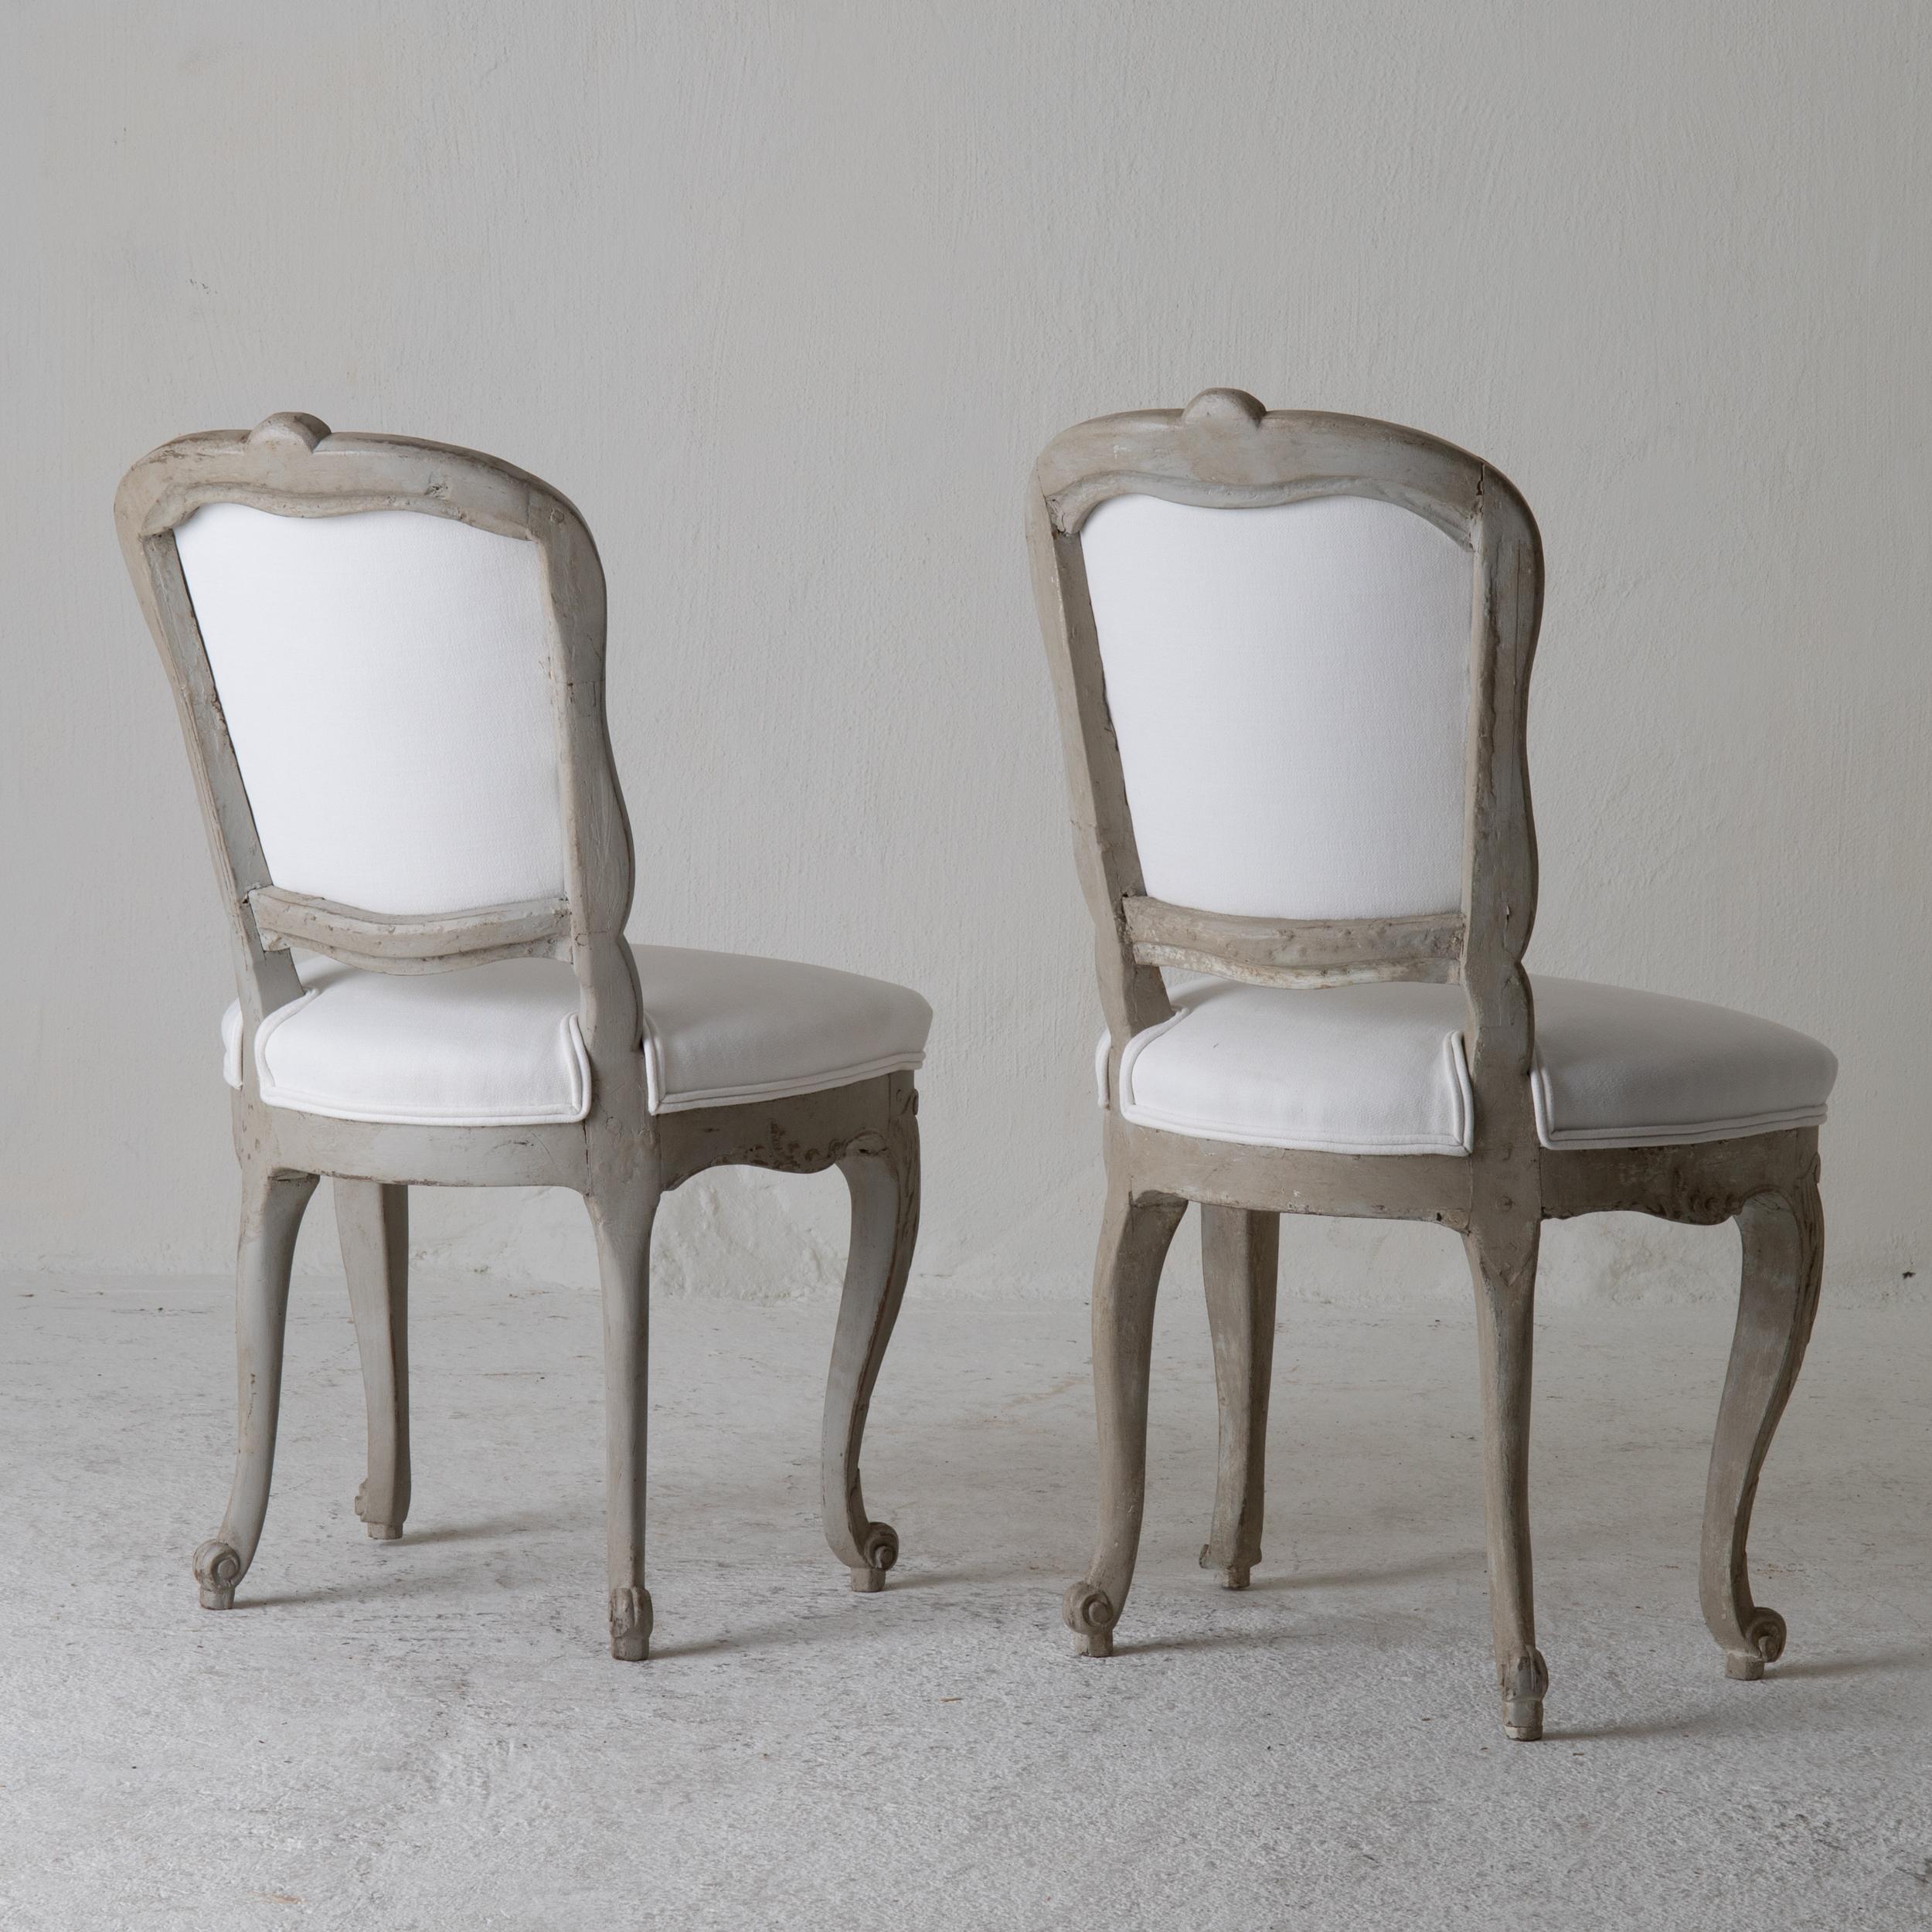 Hand-Painted Chairs Pair of Swedish Rococo 1750-1775 White Green Gray, Sweden For Sale